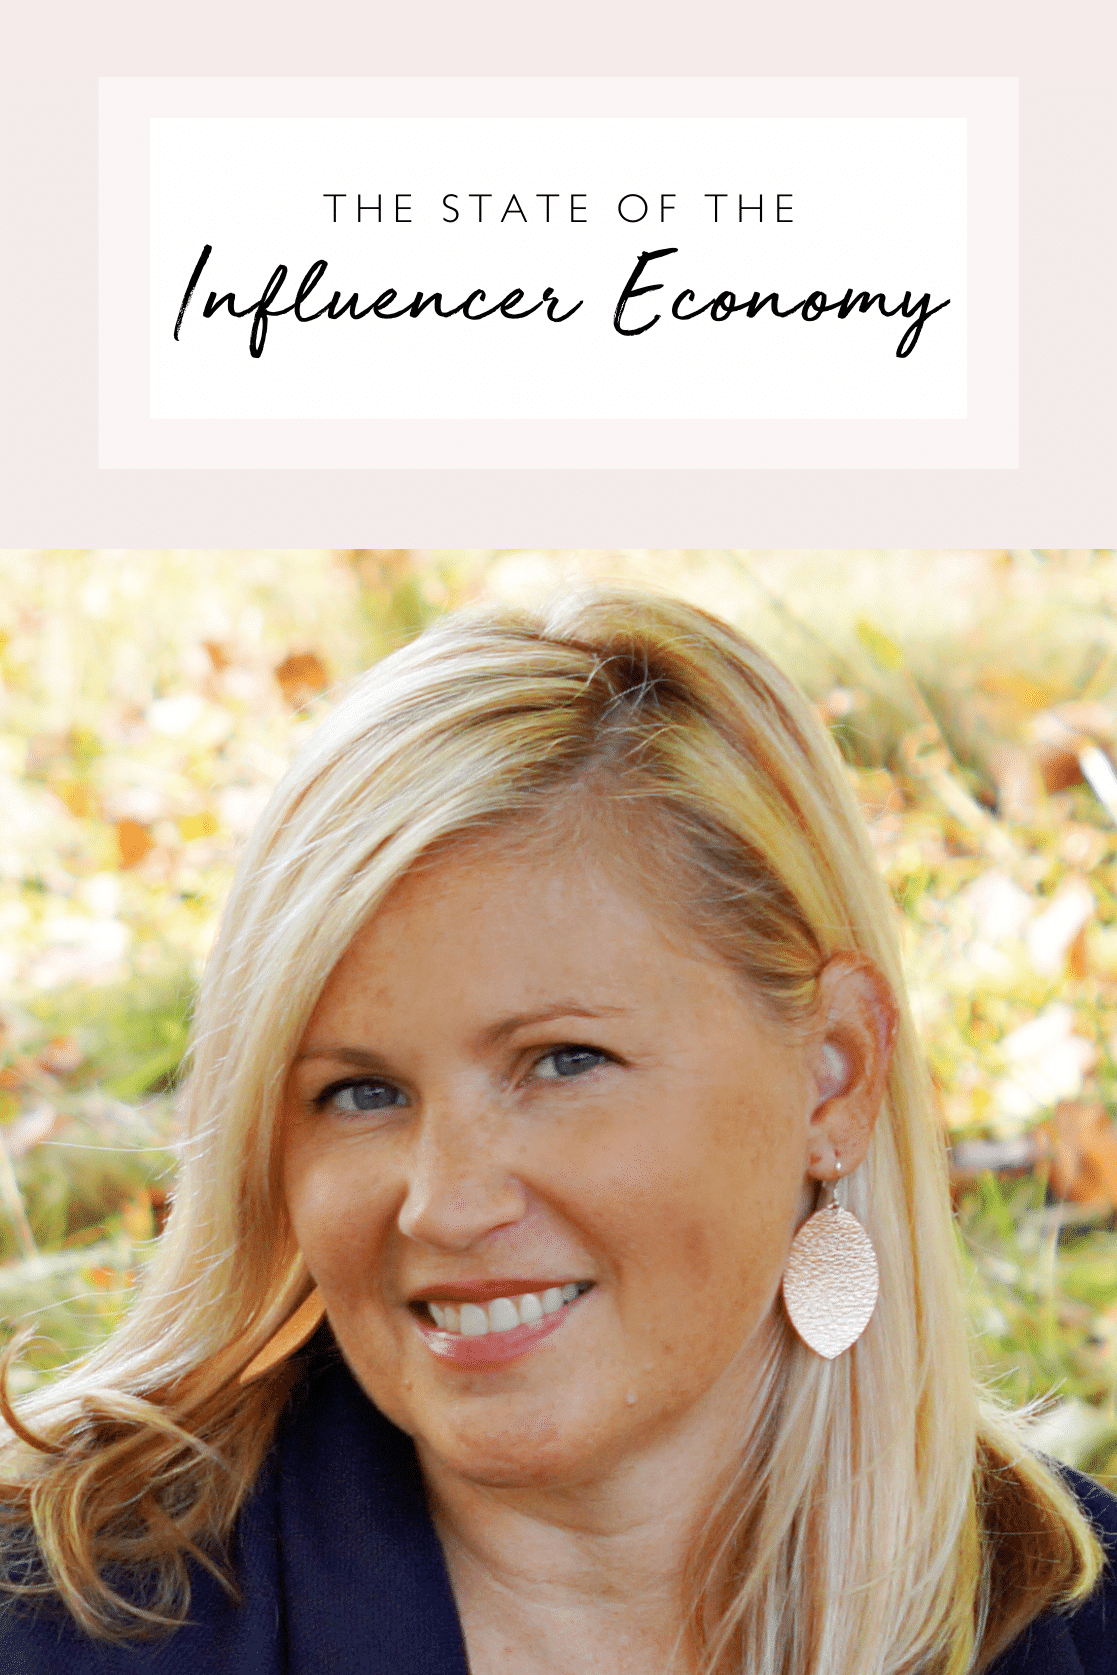 The state of the influencer economy with Erica Gatlin.